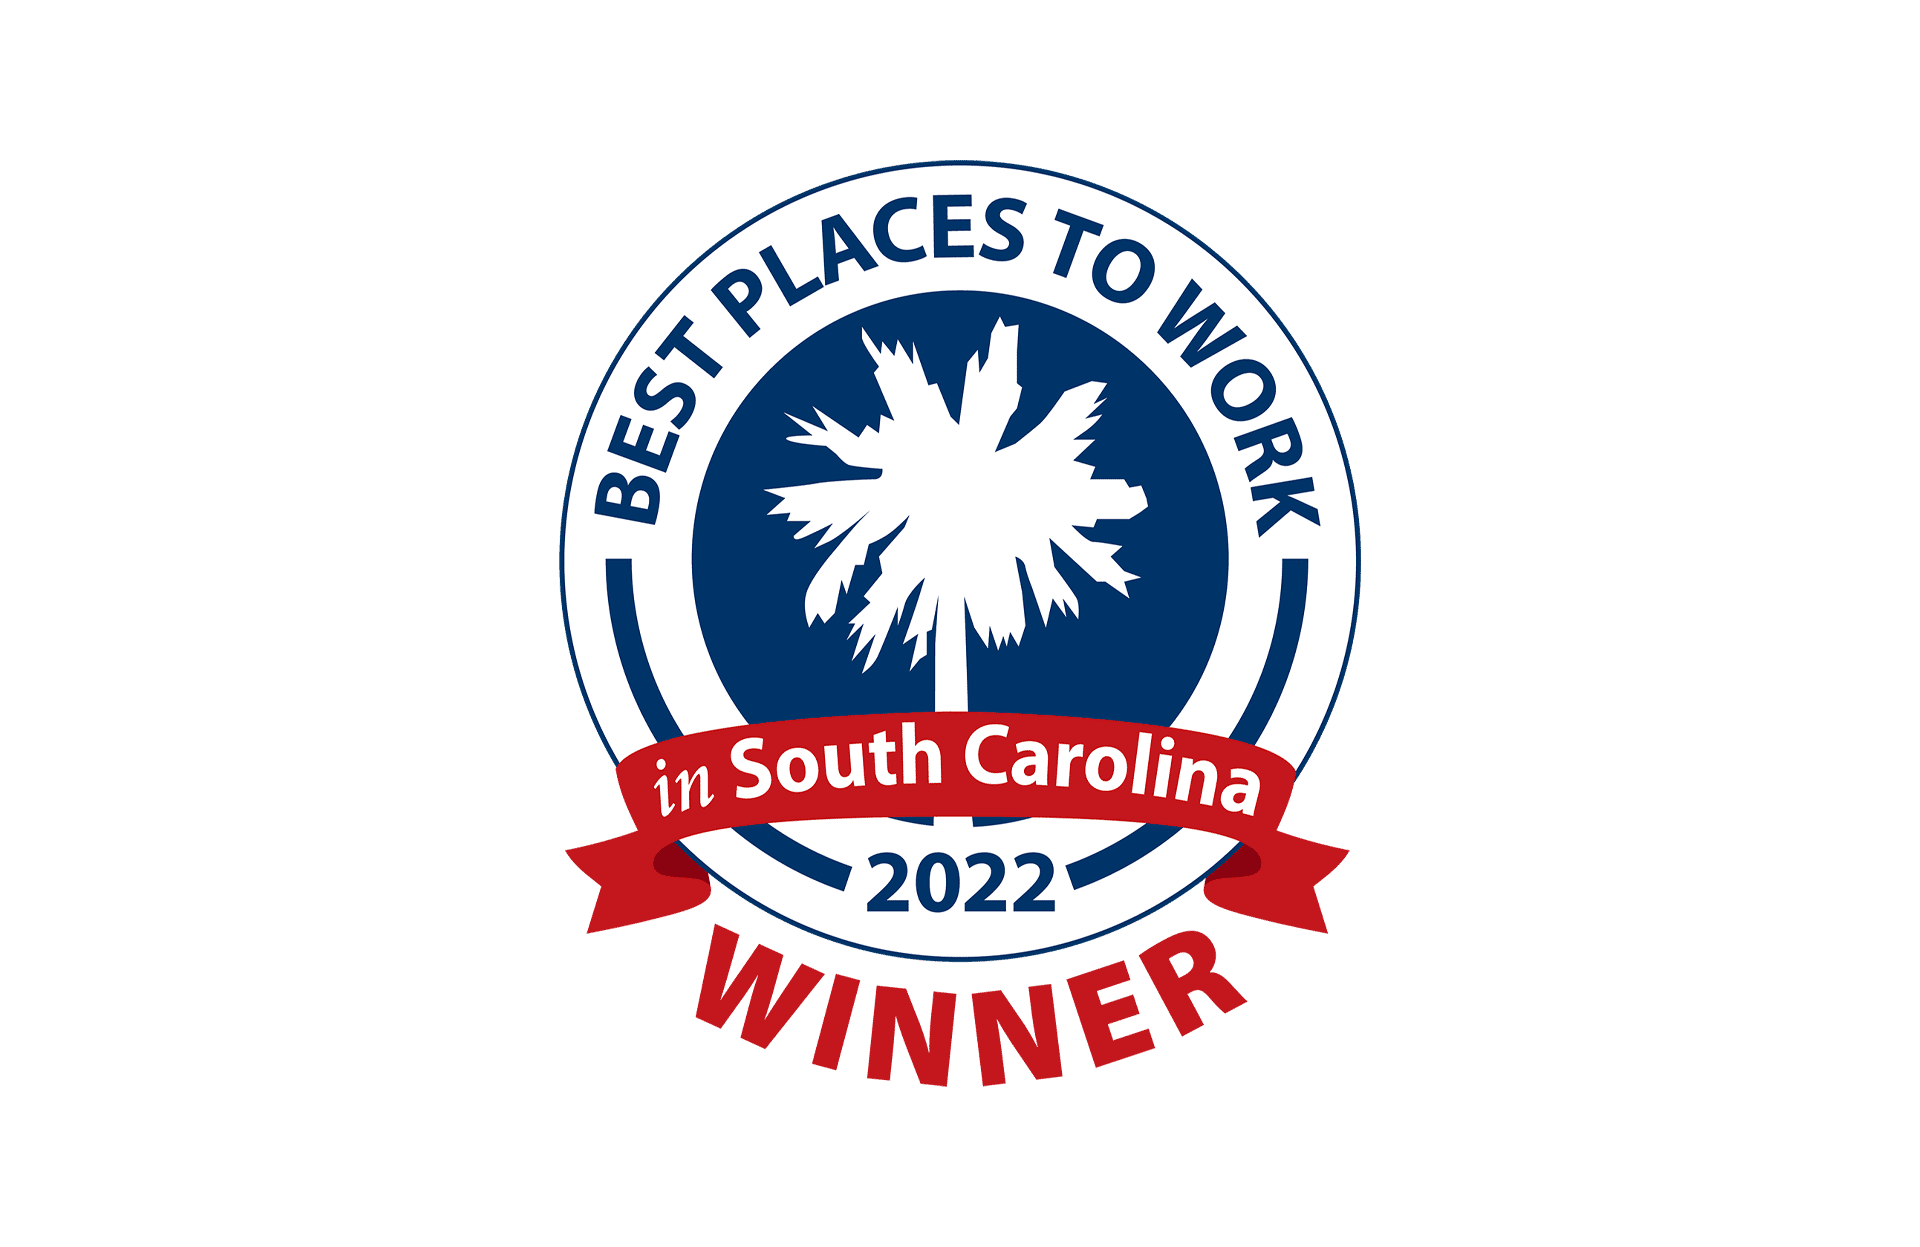 FUEL Named one of the Best Places to Work in South Carolina for 2022